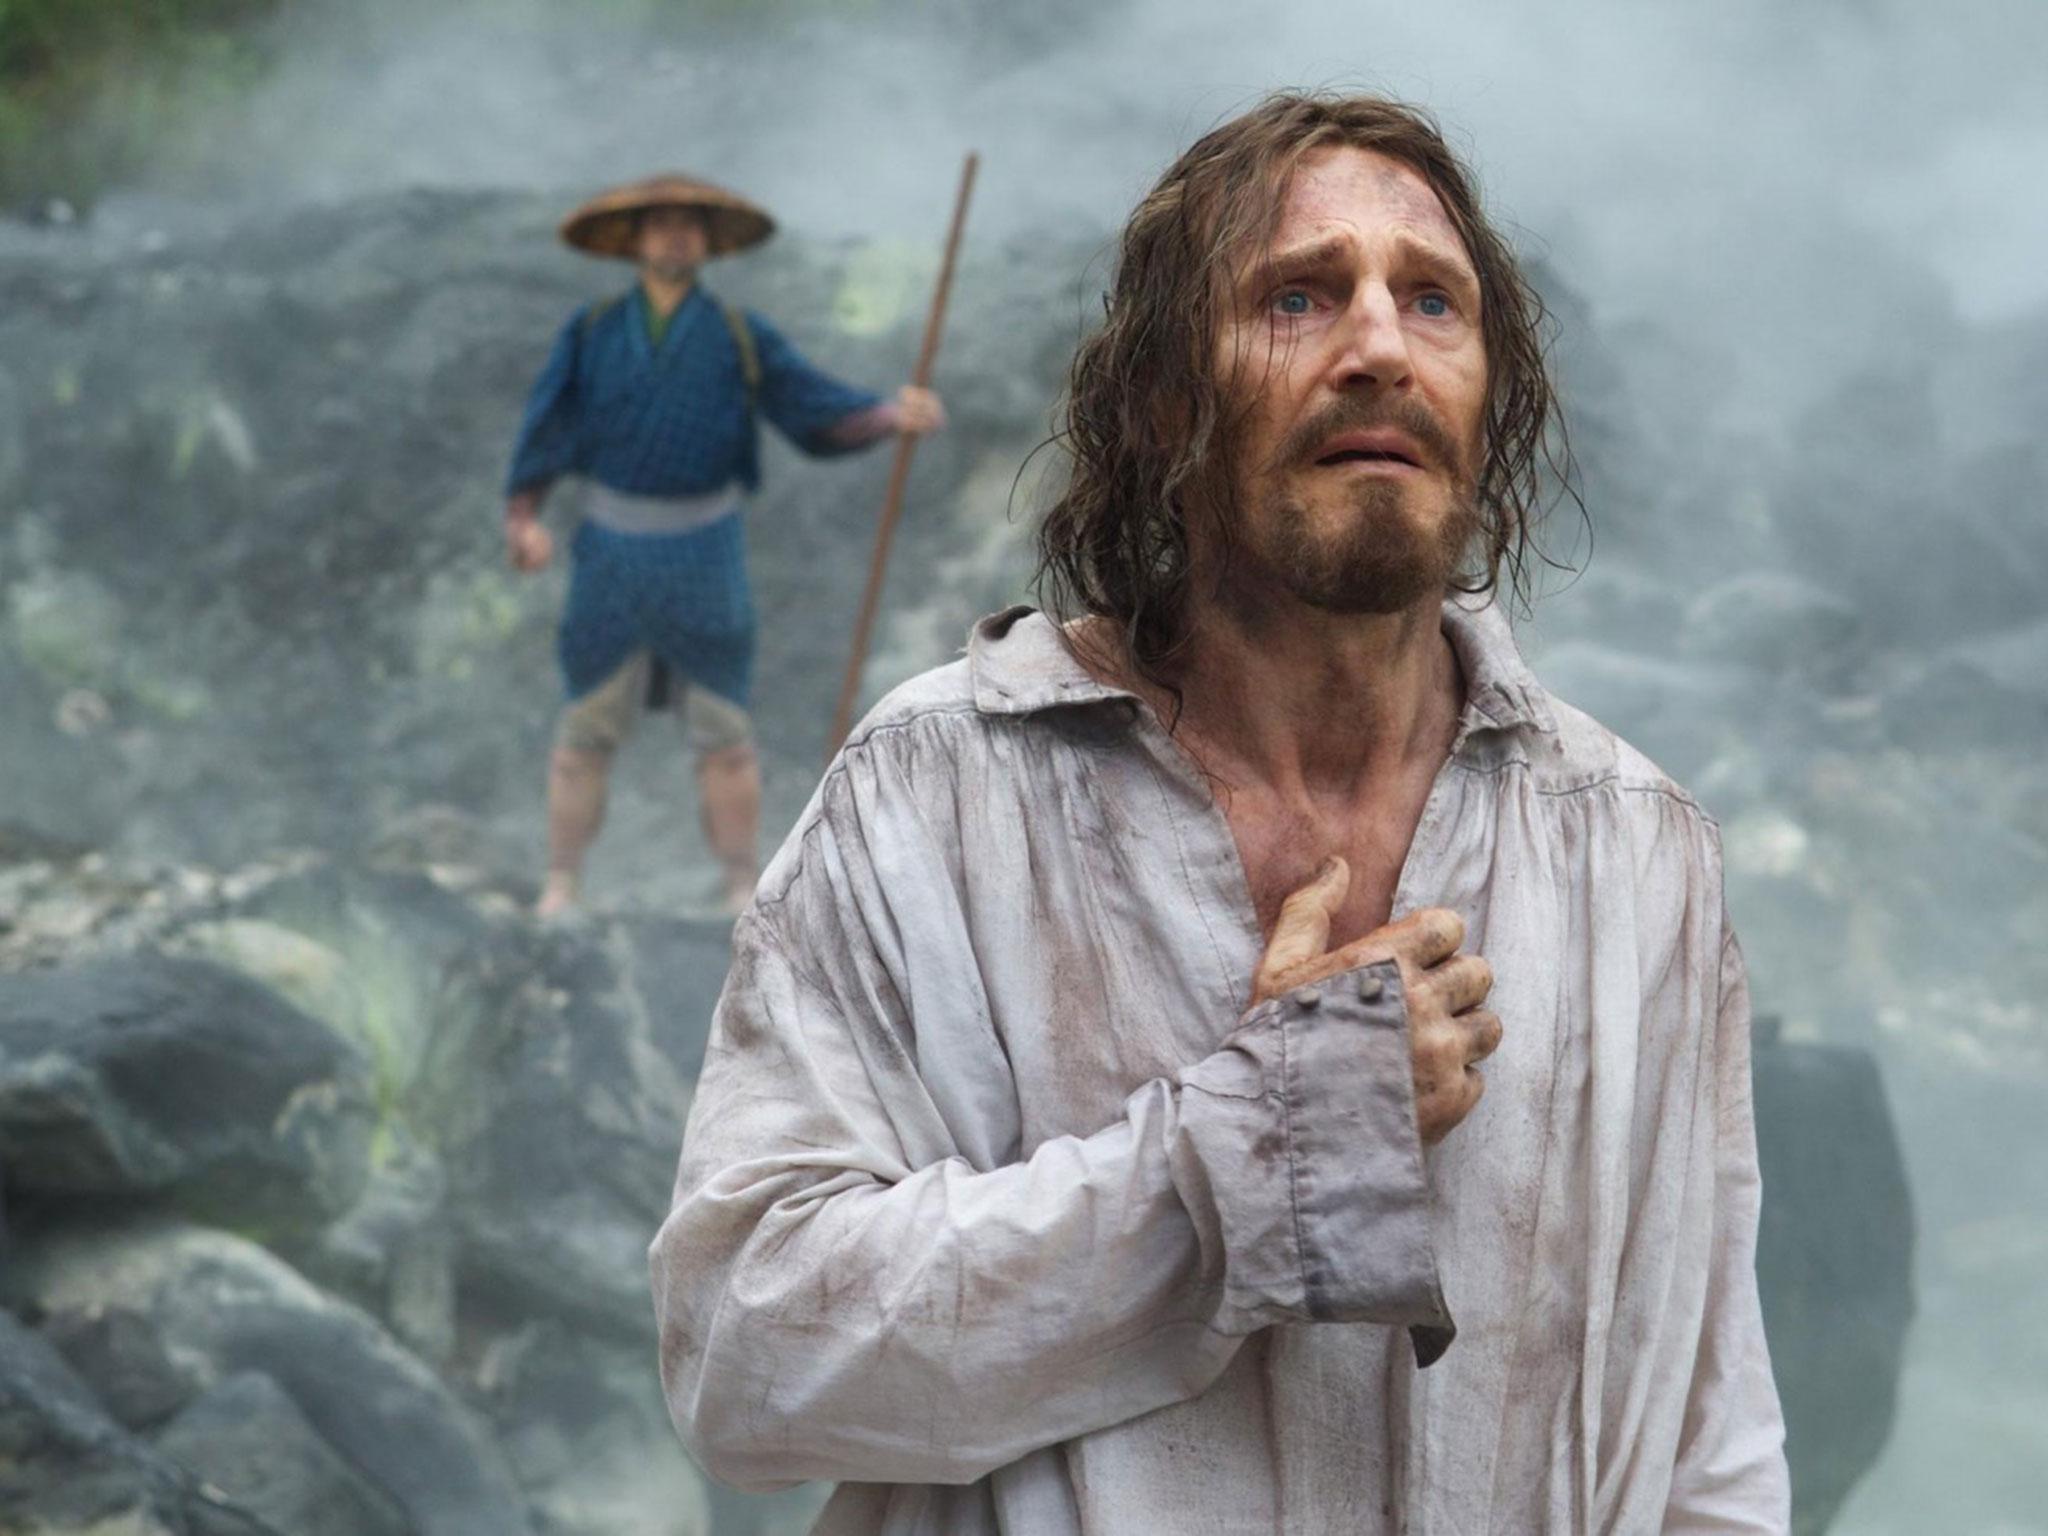 Liam Neeson takes a break from action films to play Father Ferreira in Scorsese's 'The Silence'